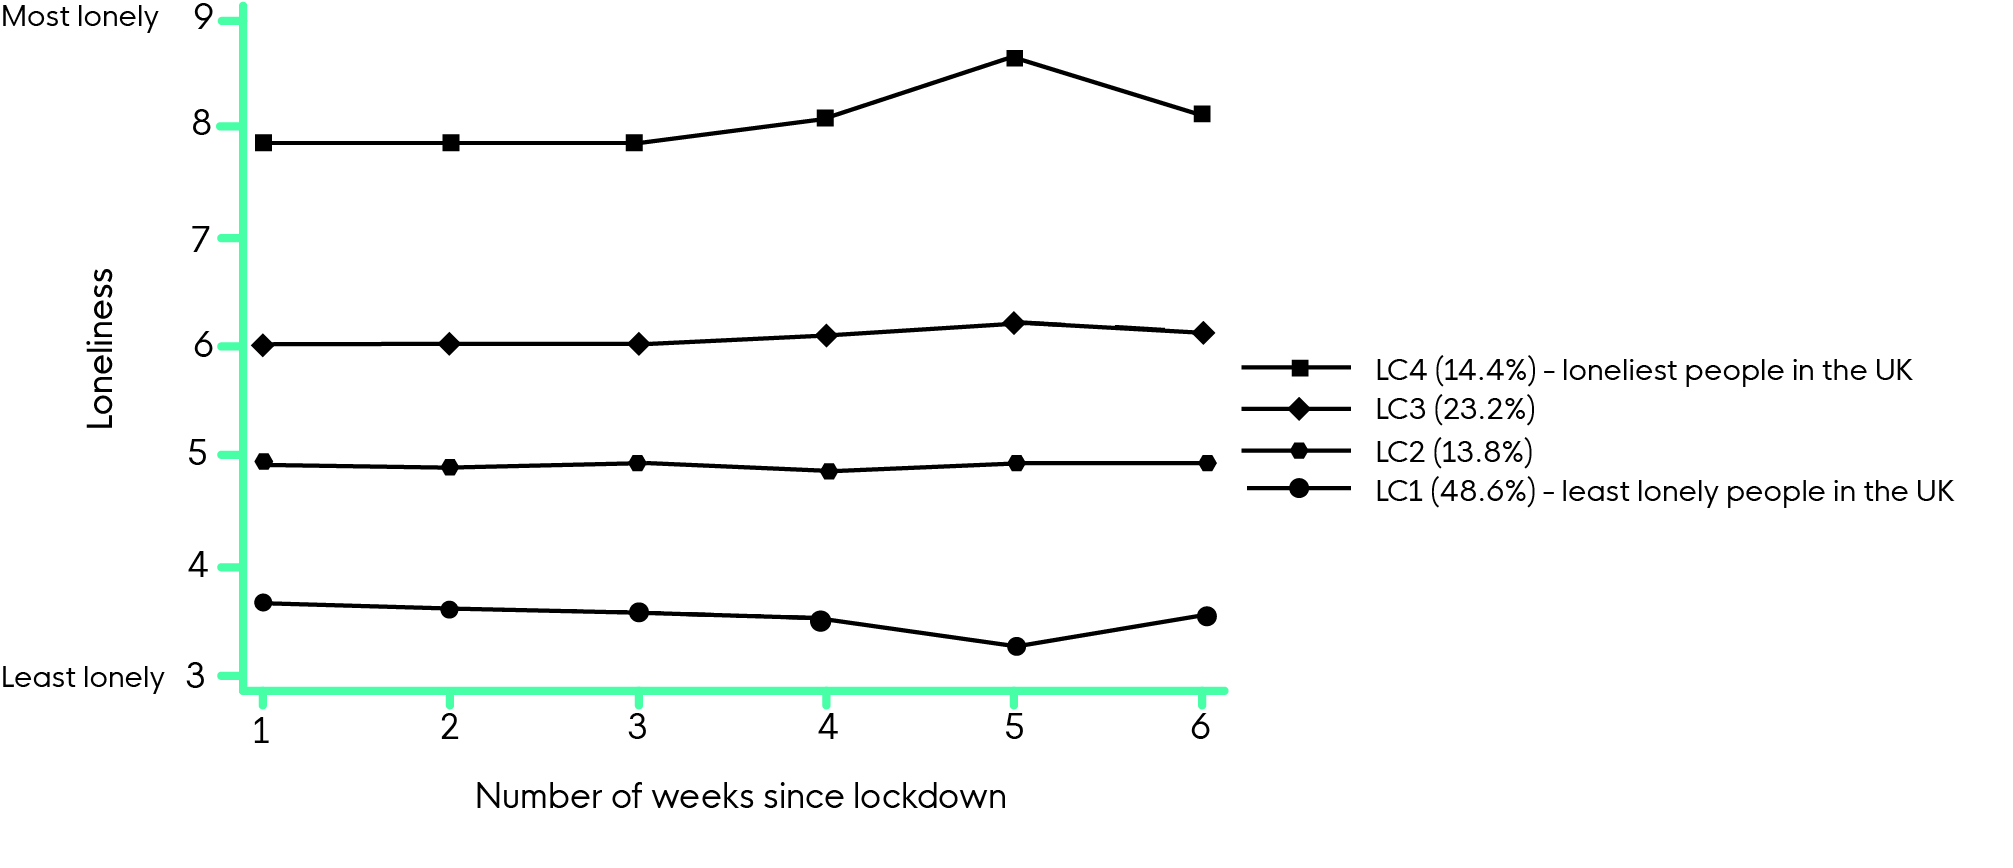 Graph showing the least and most lonely people in the UK during lockdown over the course of six weeks